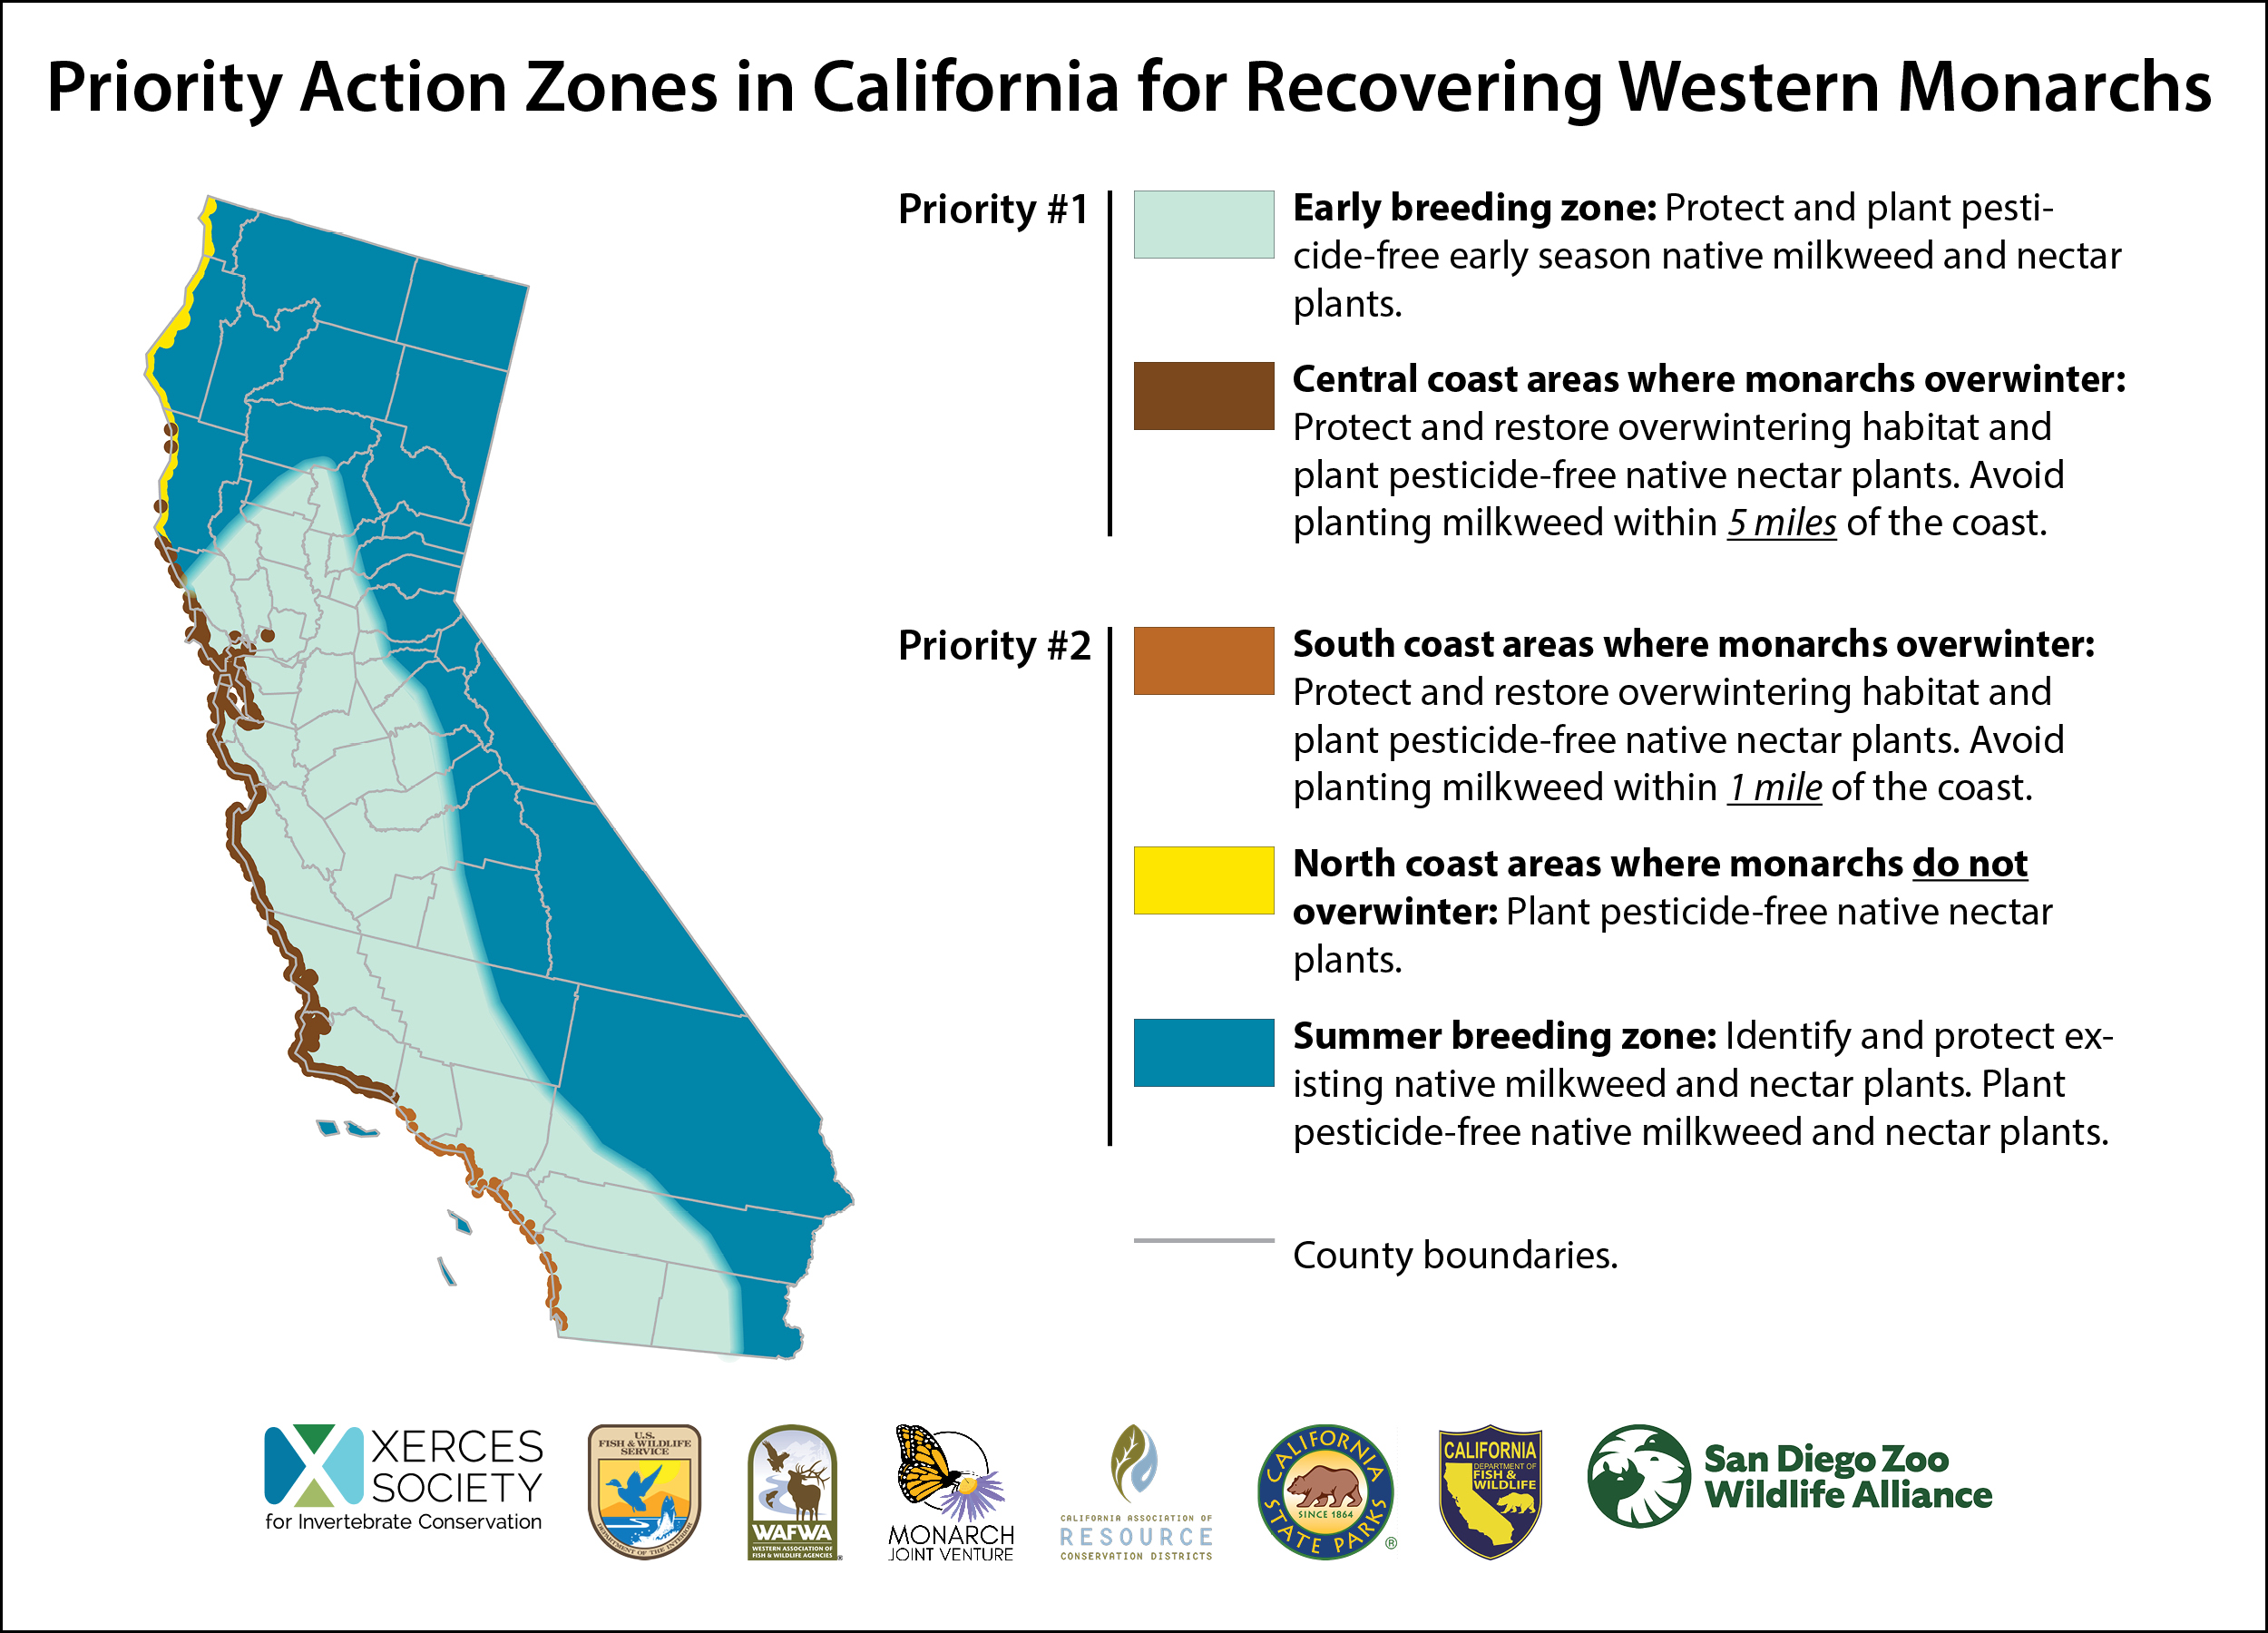 Map of western monarch call to action priority zones, with high priority placed on coastal overwintering sites and early breeding zones several hundred miles east and north of the coast. 